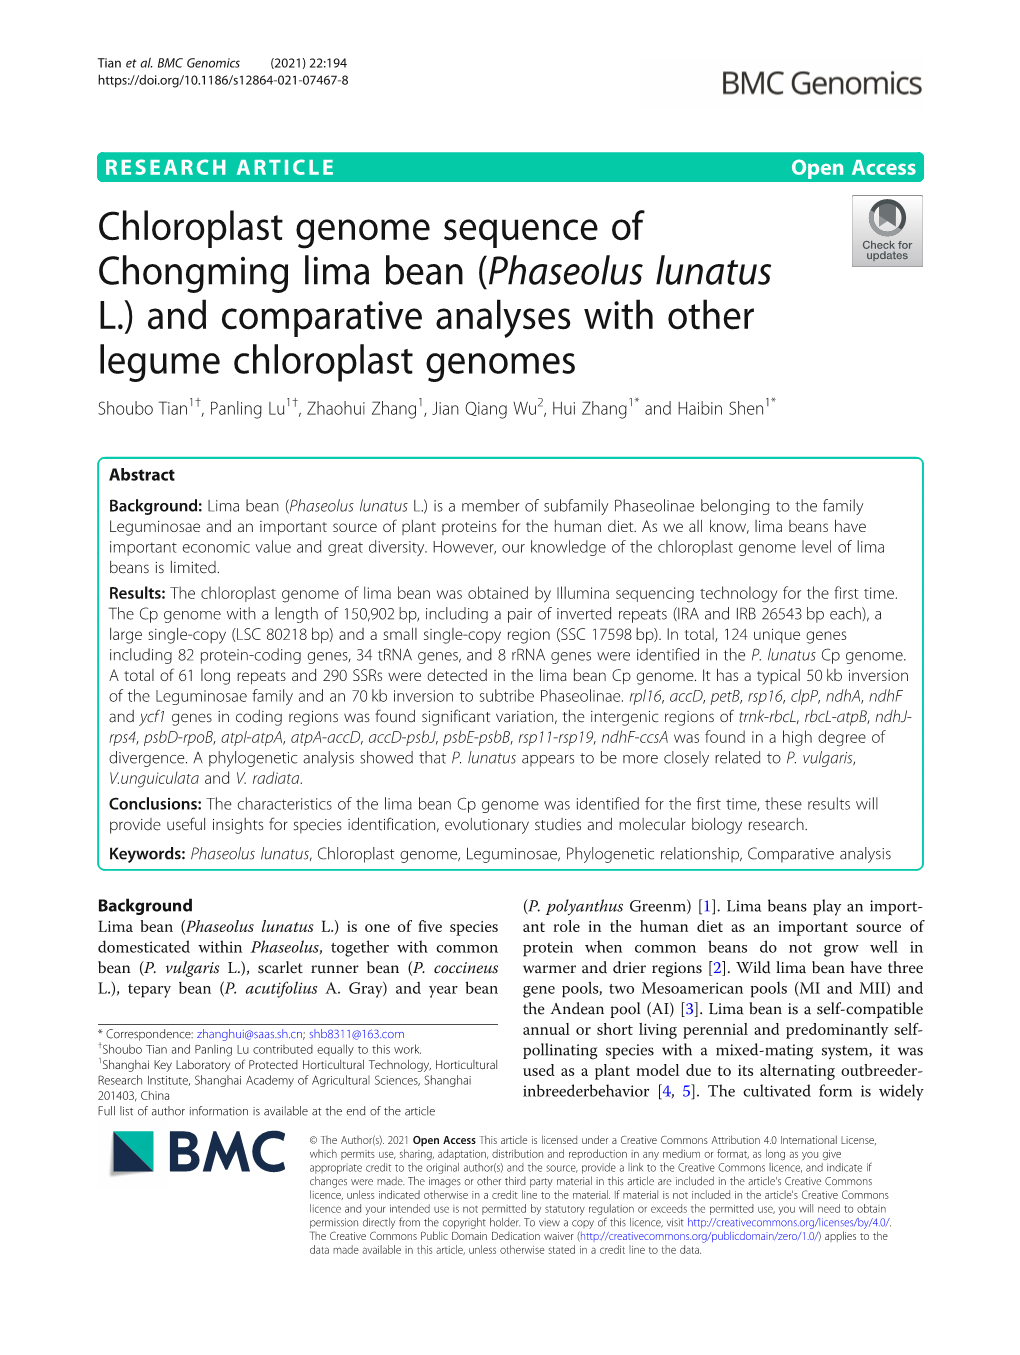 Chloroplast Genome Sequence of Chongming Lima